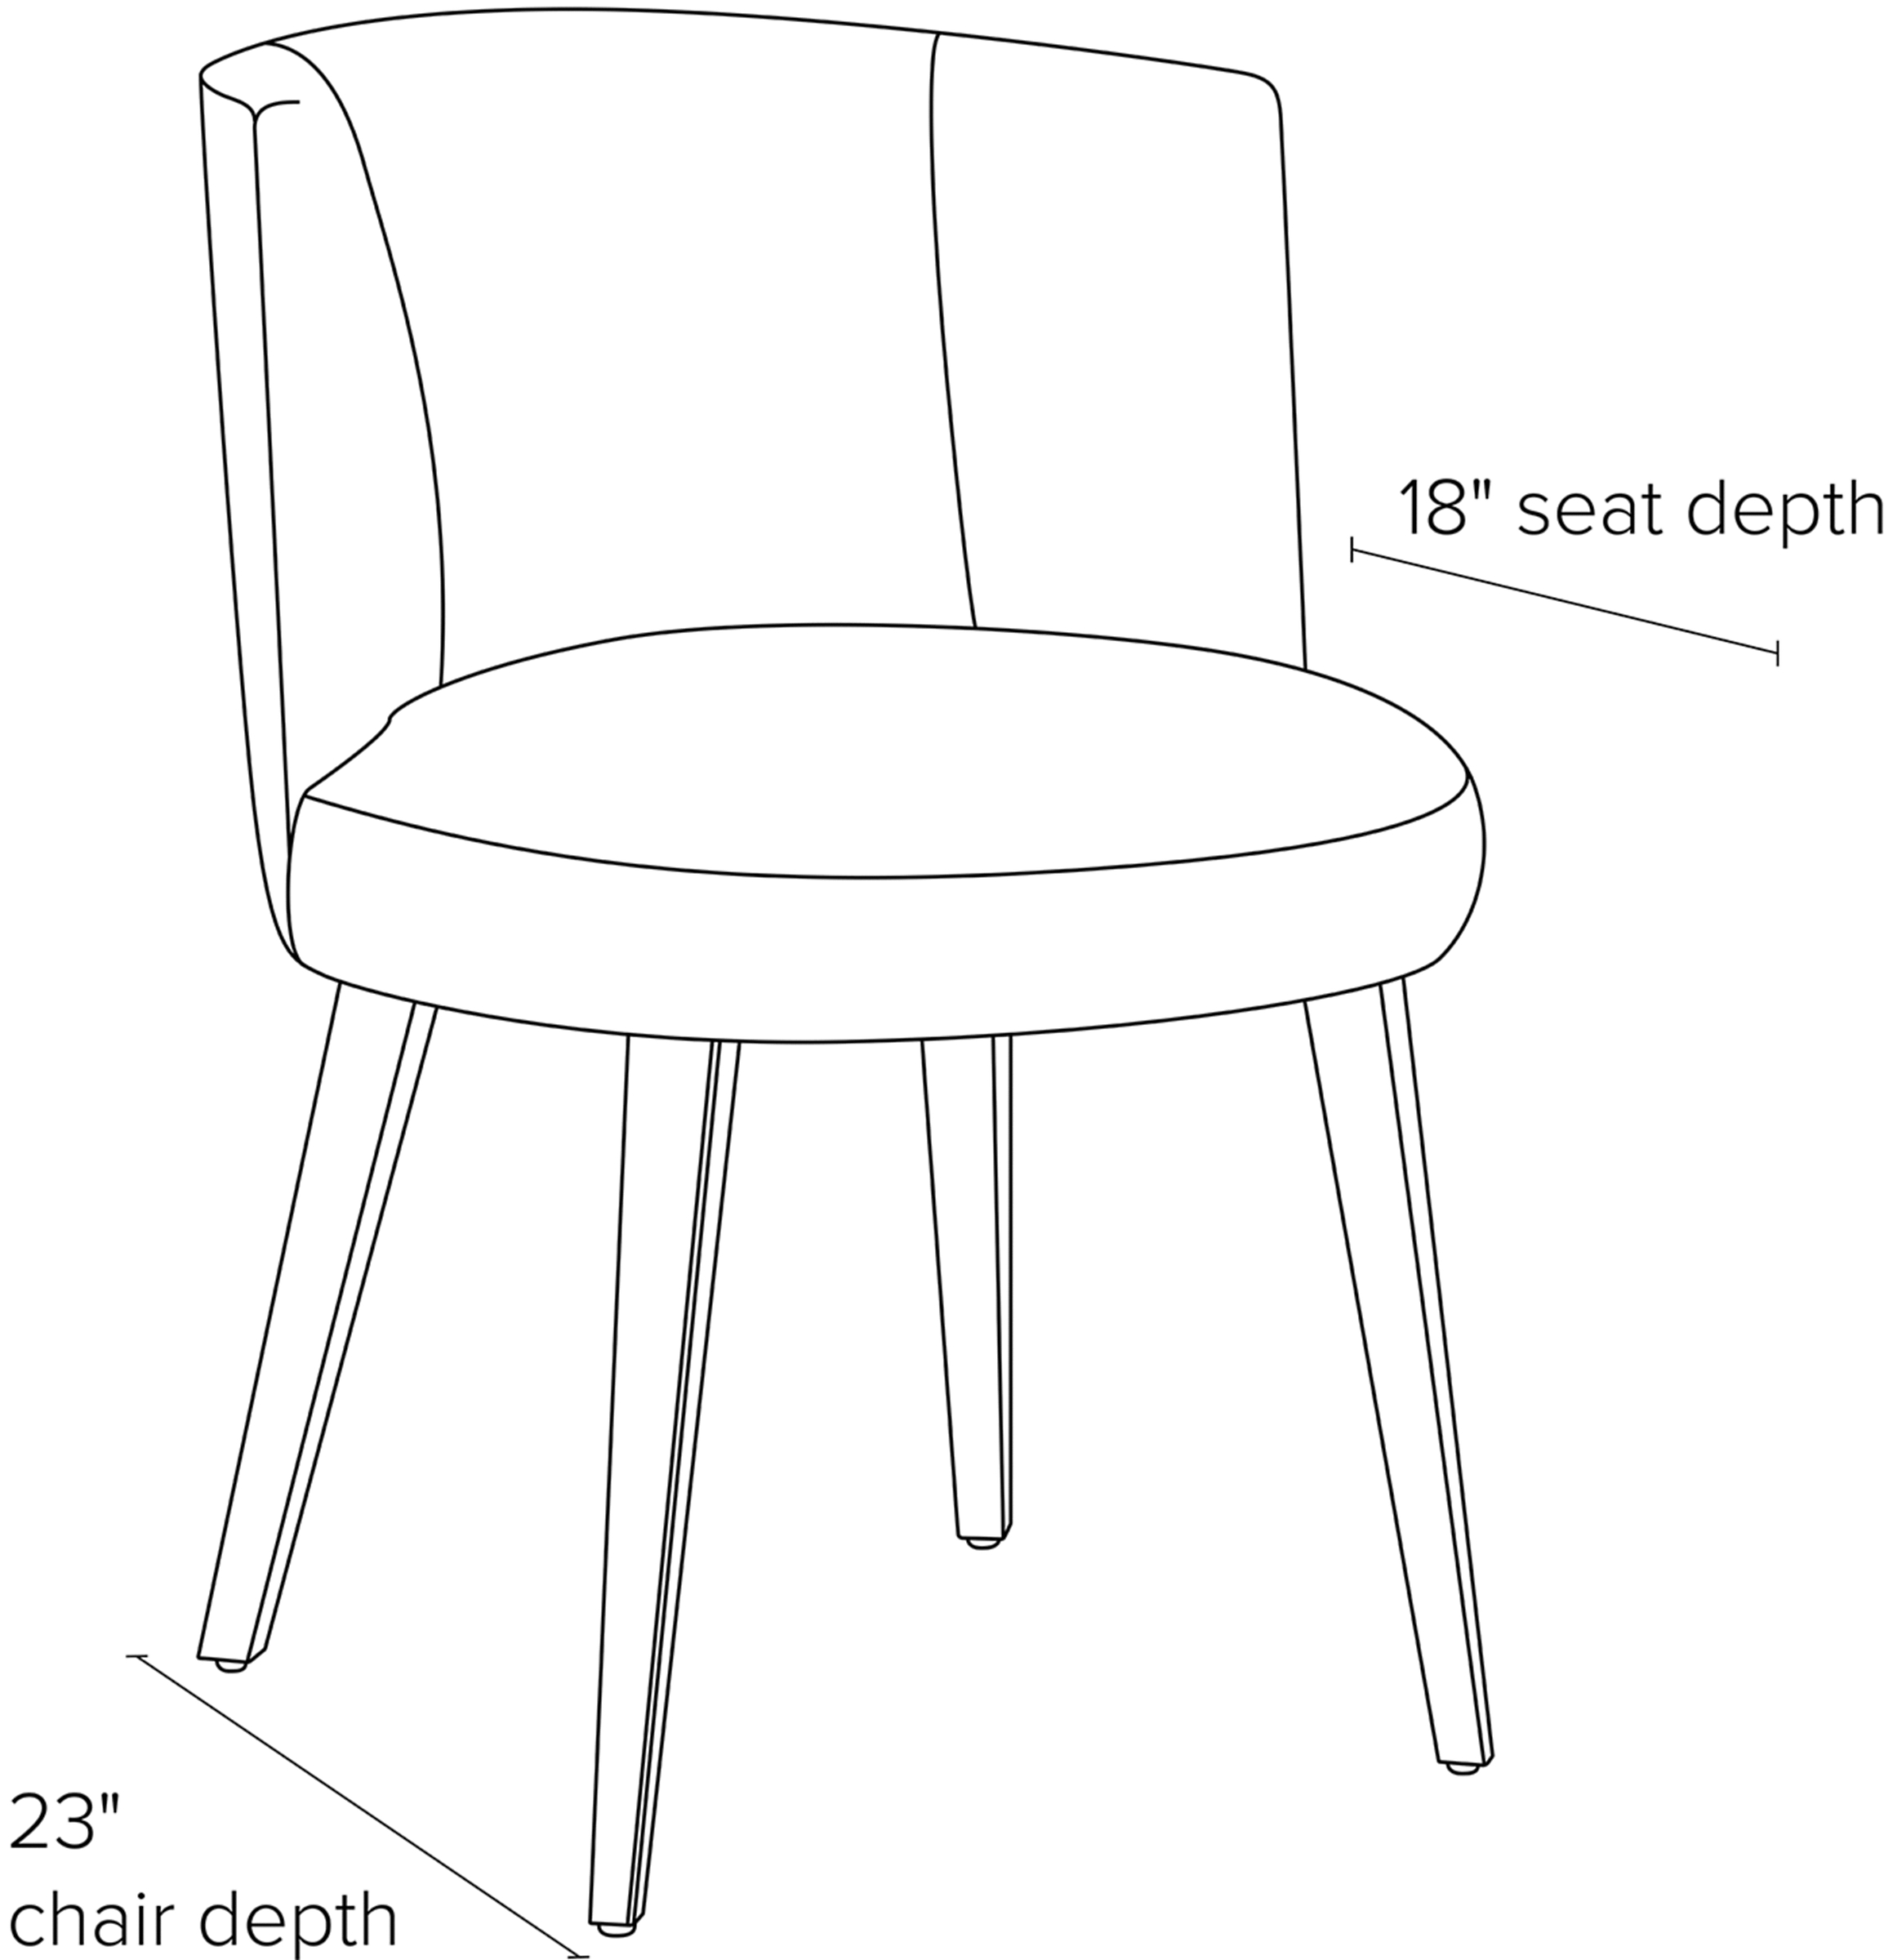 Side view dimension illustration of June dining chair.